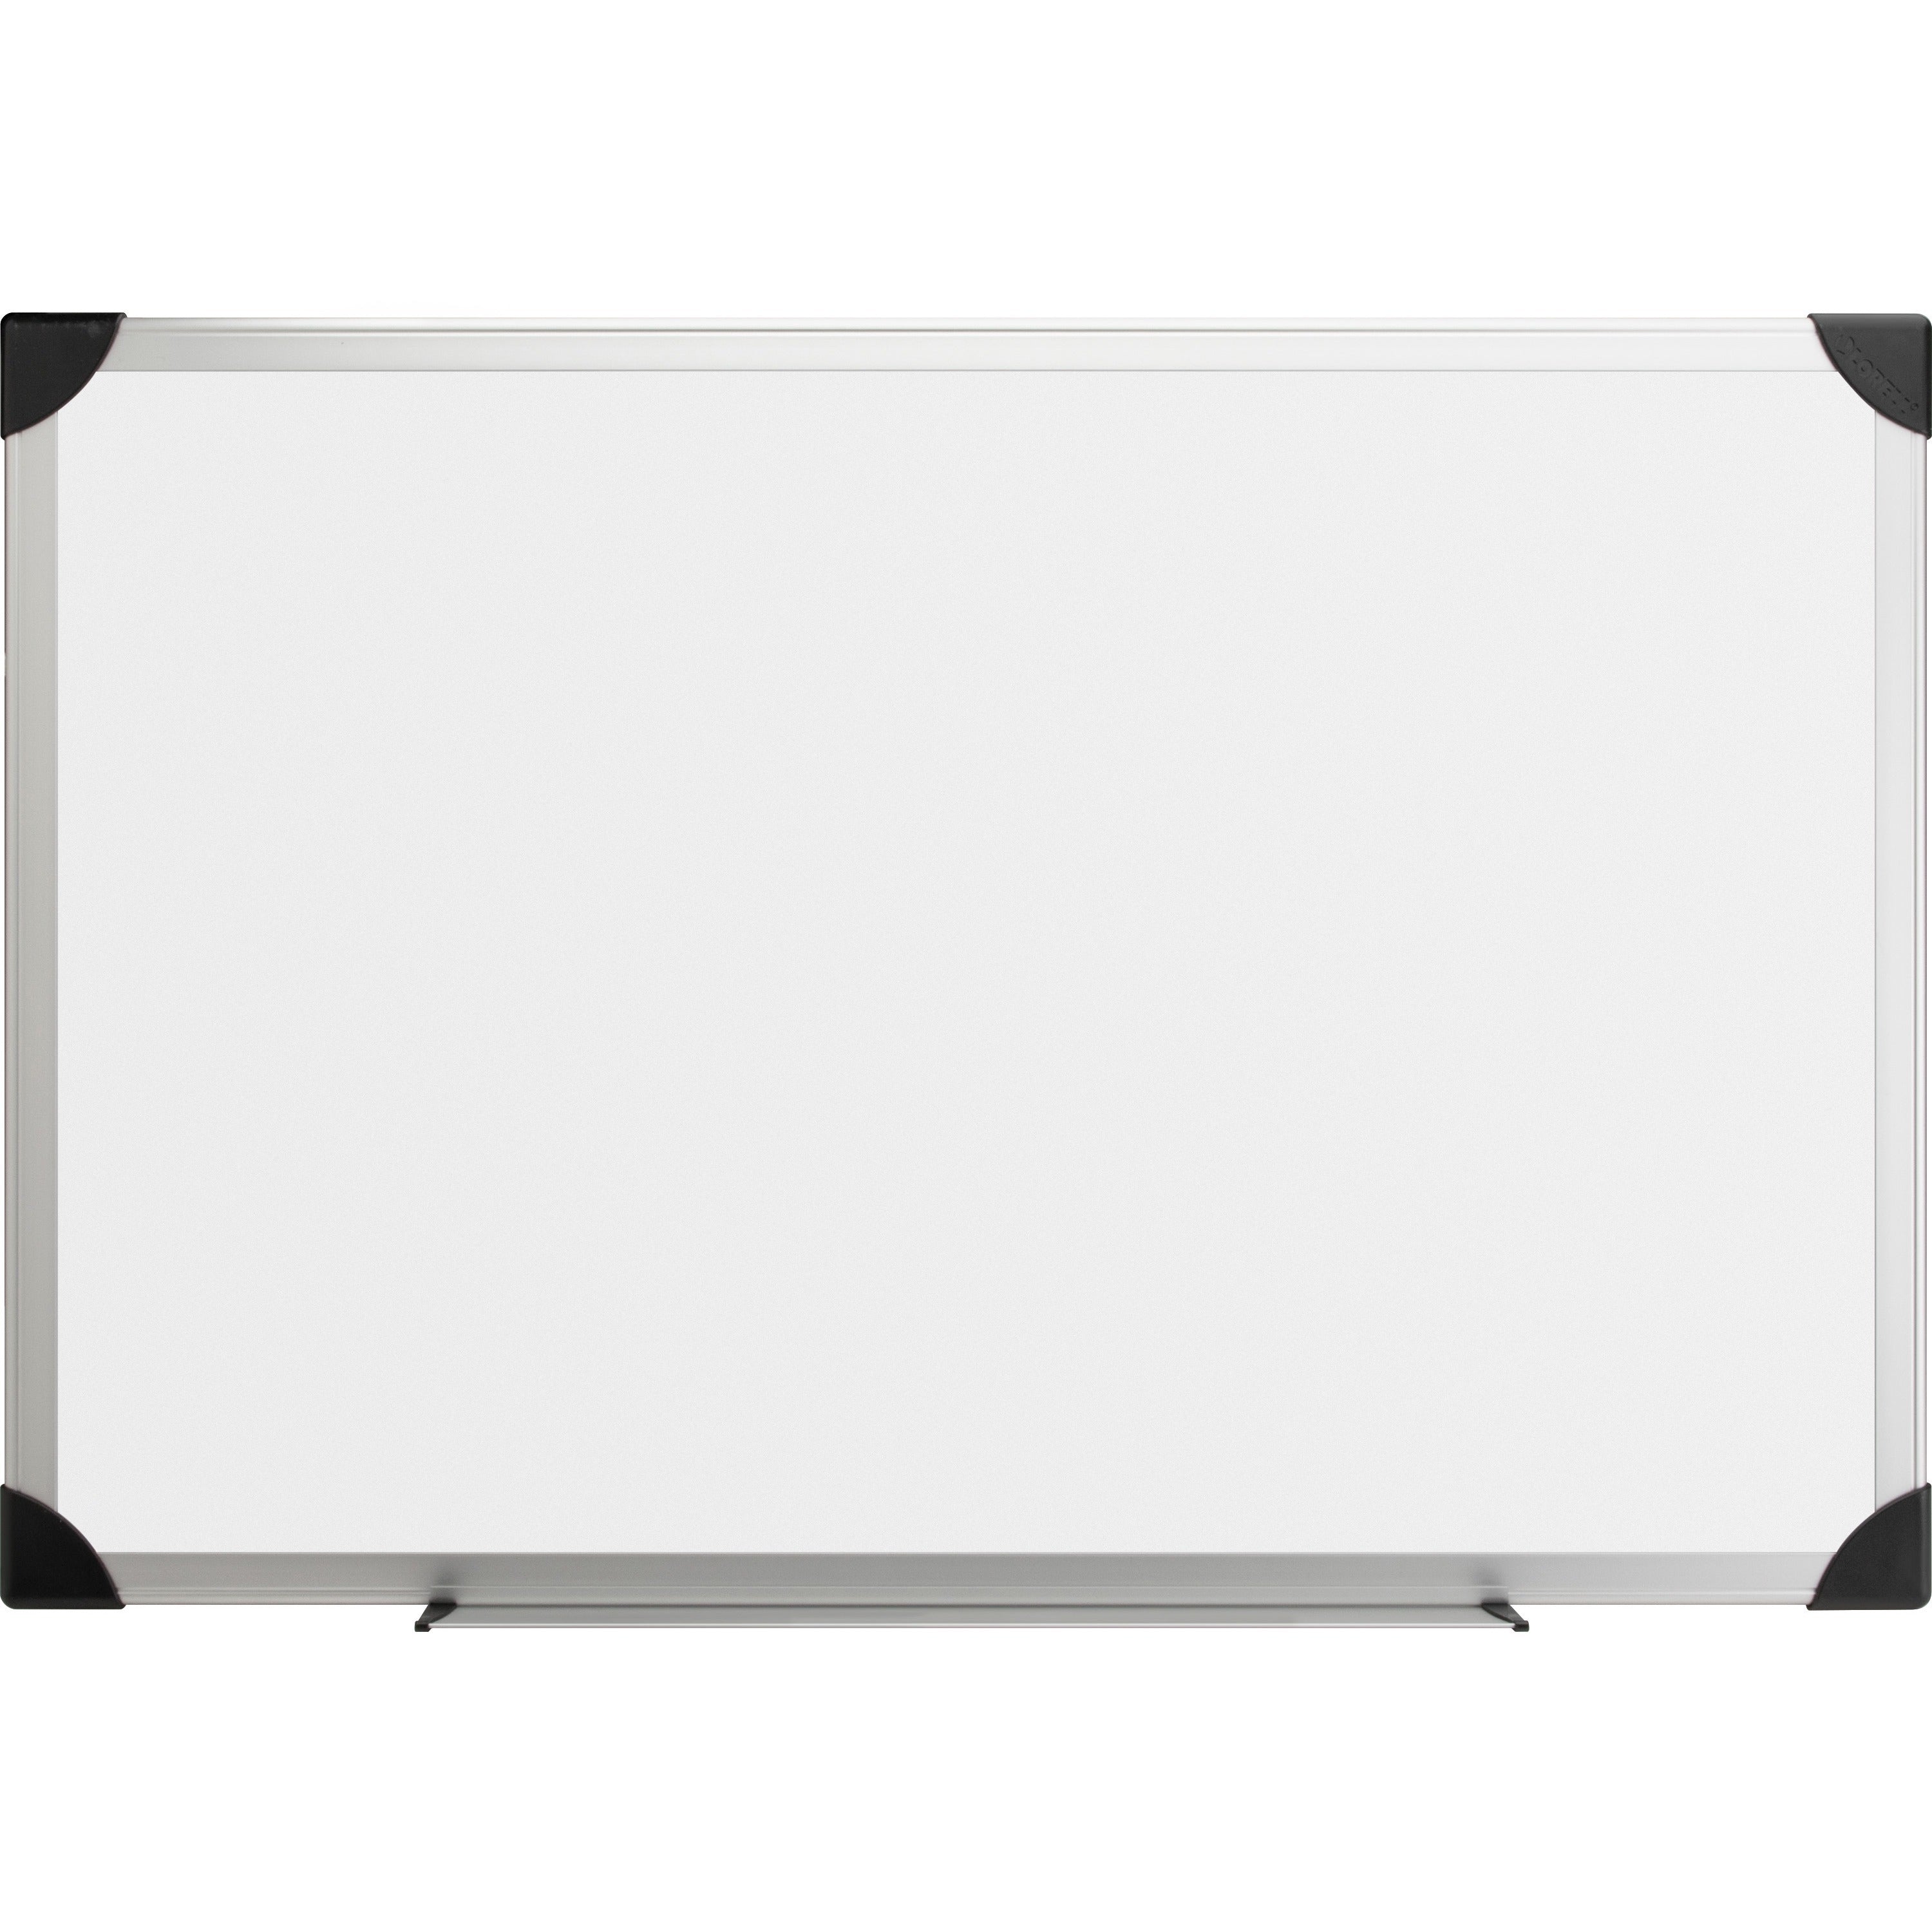 Lorell Dry-erase Board - 36" (3 ft) Width x 24" (2 ft) Height - White Styrene Surface - Aluminum Frame - Ghost Resistant, Scratch Resistant - 1 Each - 